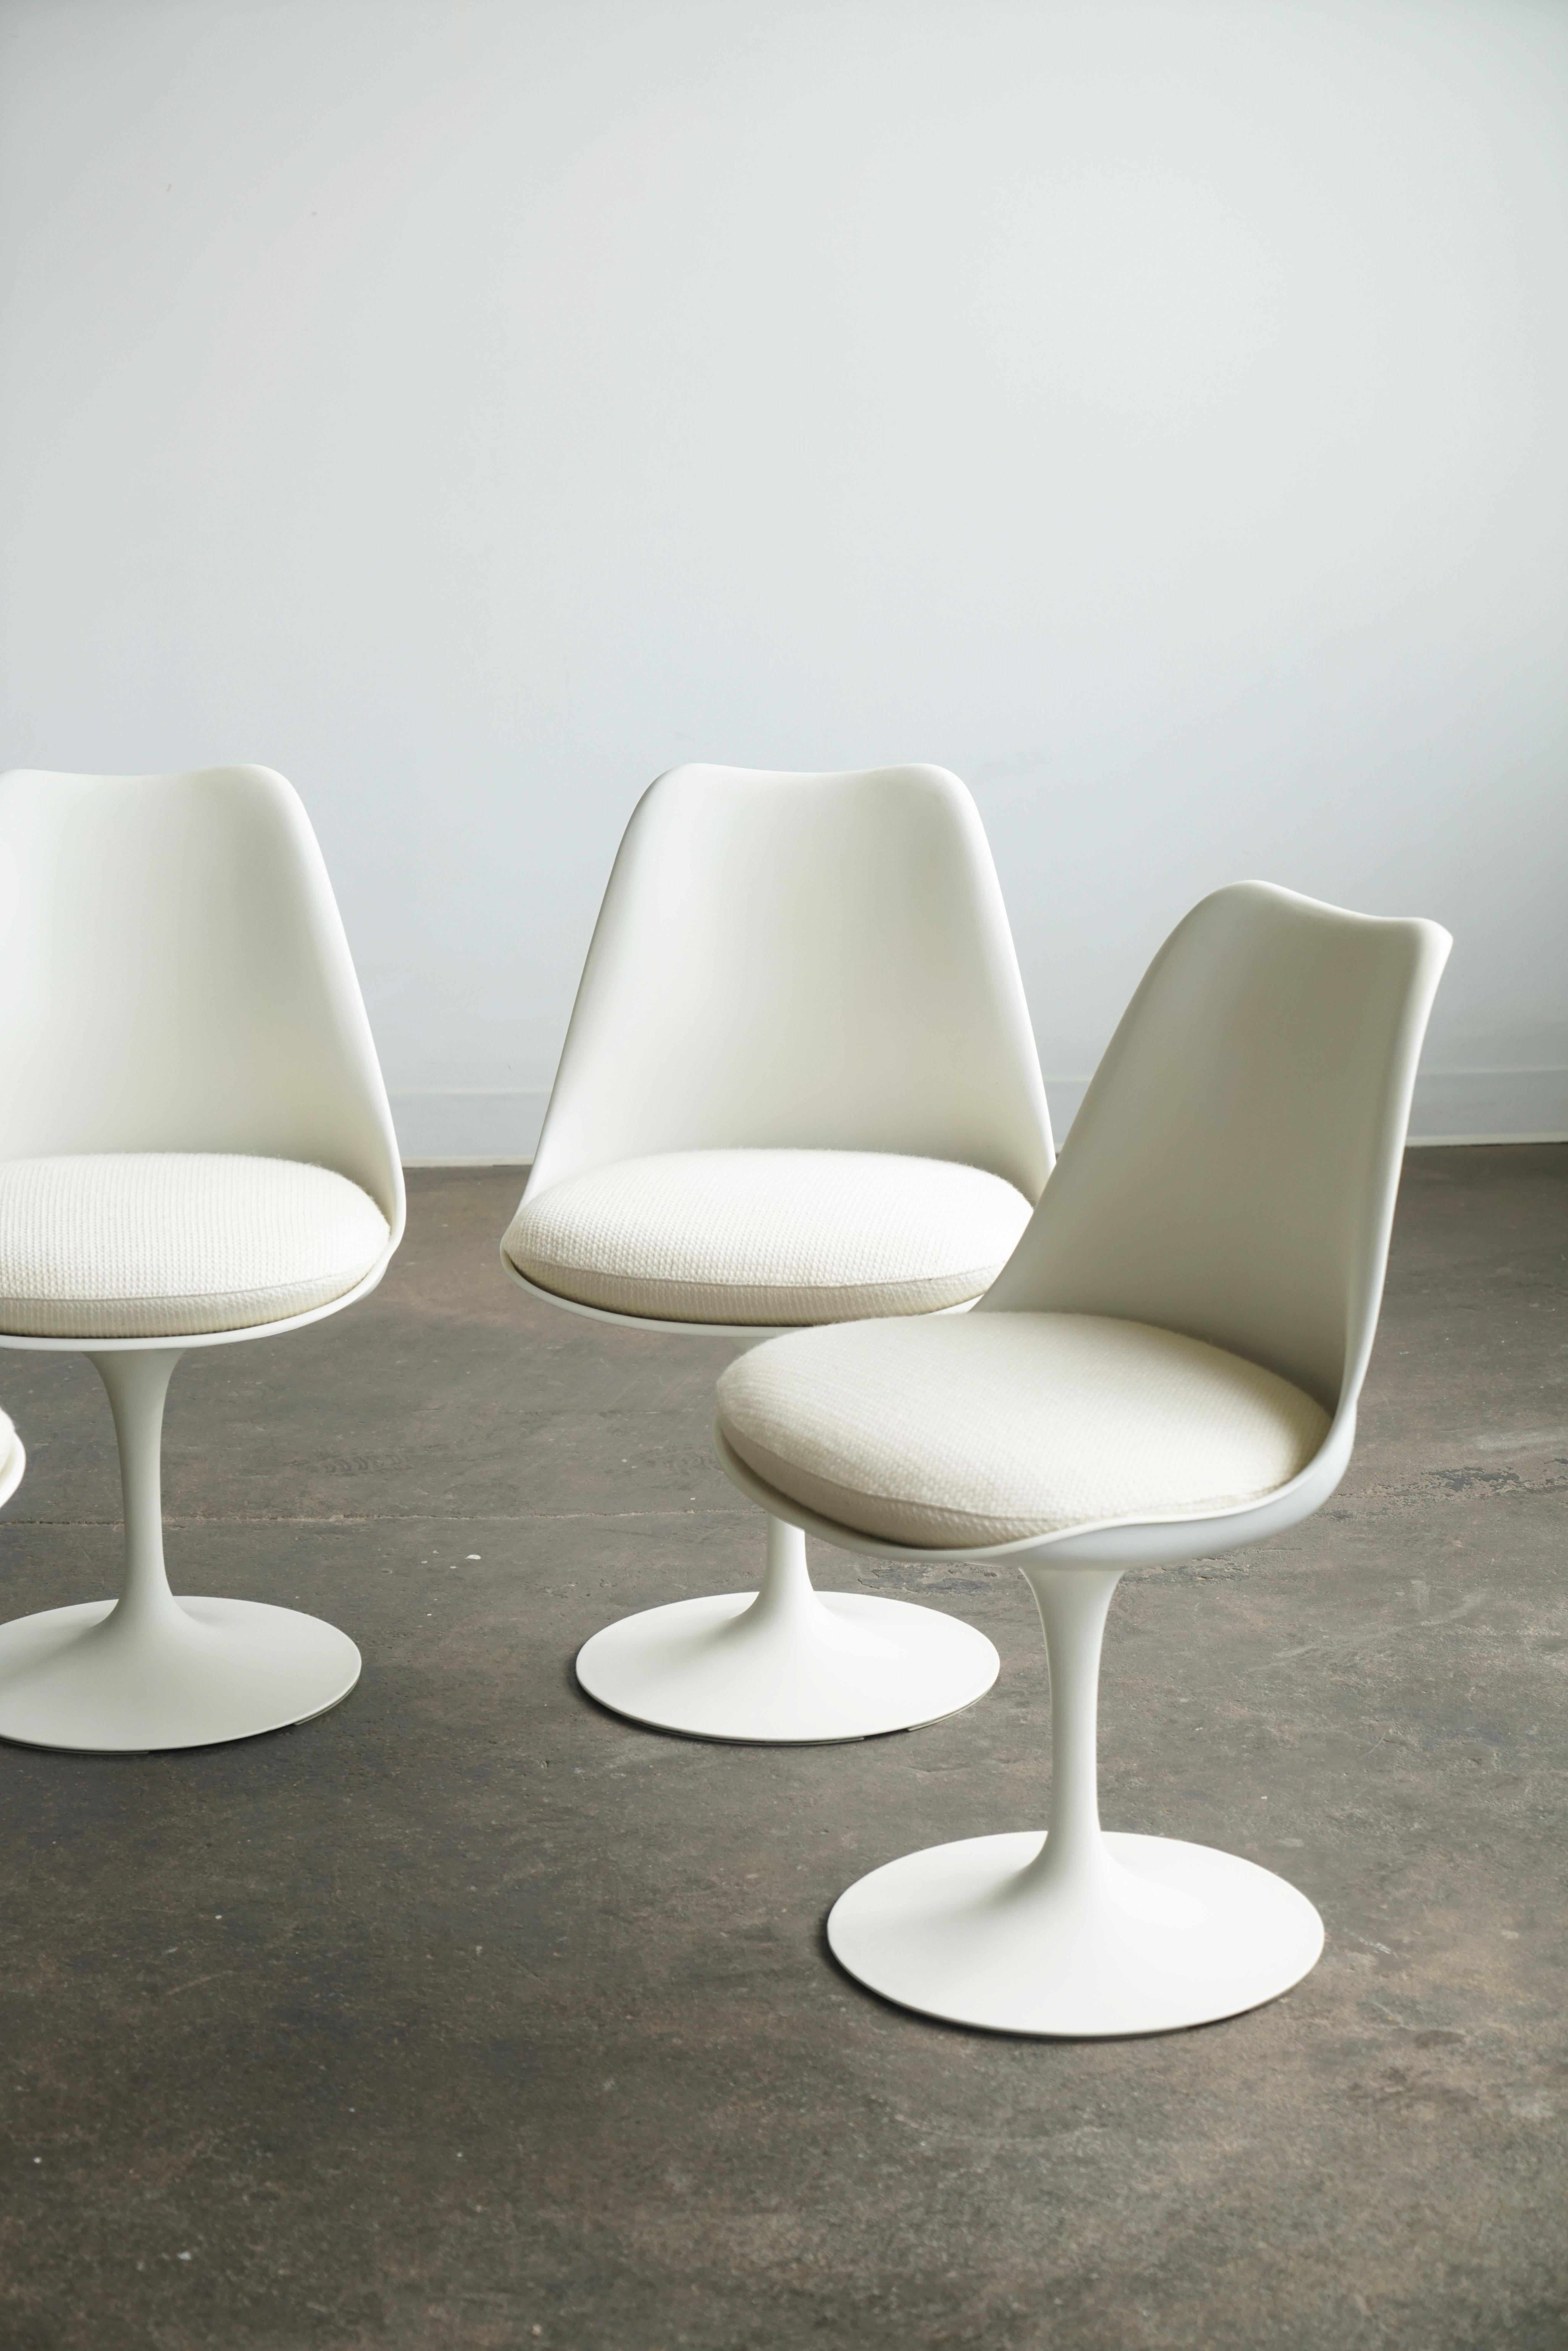 Mid-Century Modern 1960's Eero Saarinen Tulip dining chairs for Knoll, set of 4 upholstered For Sale